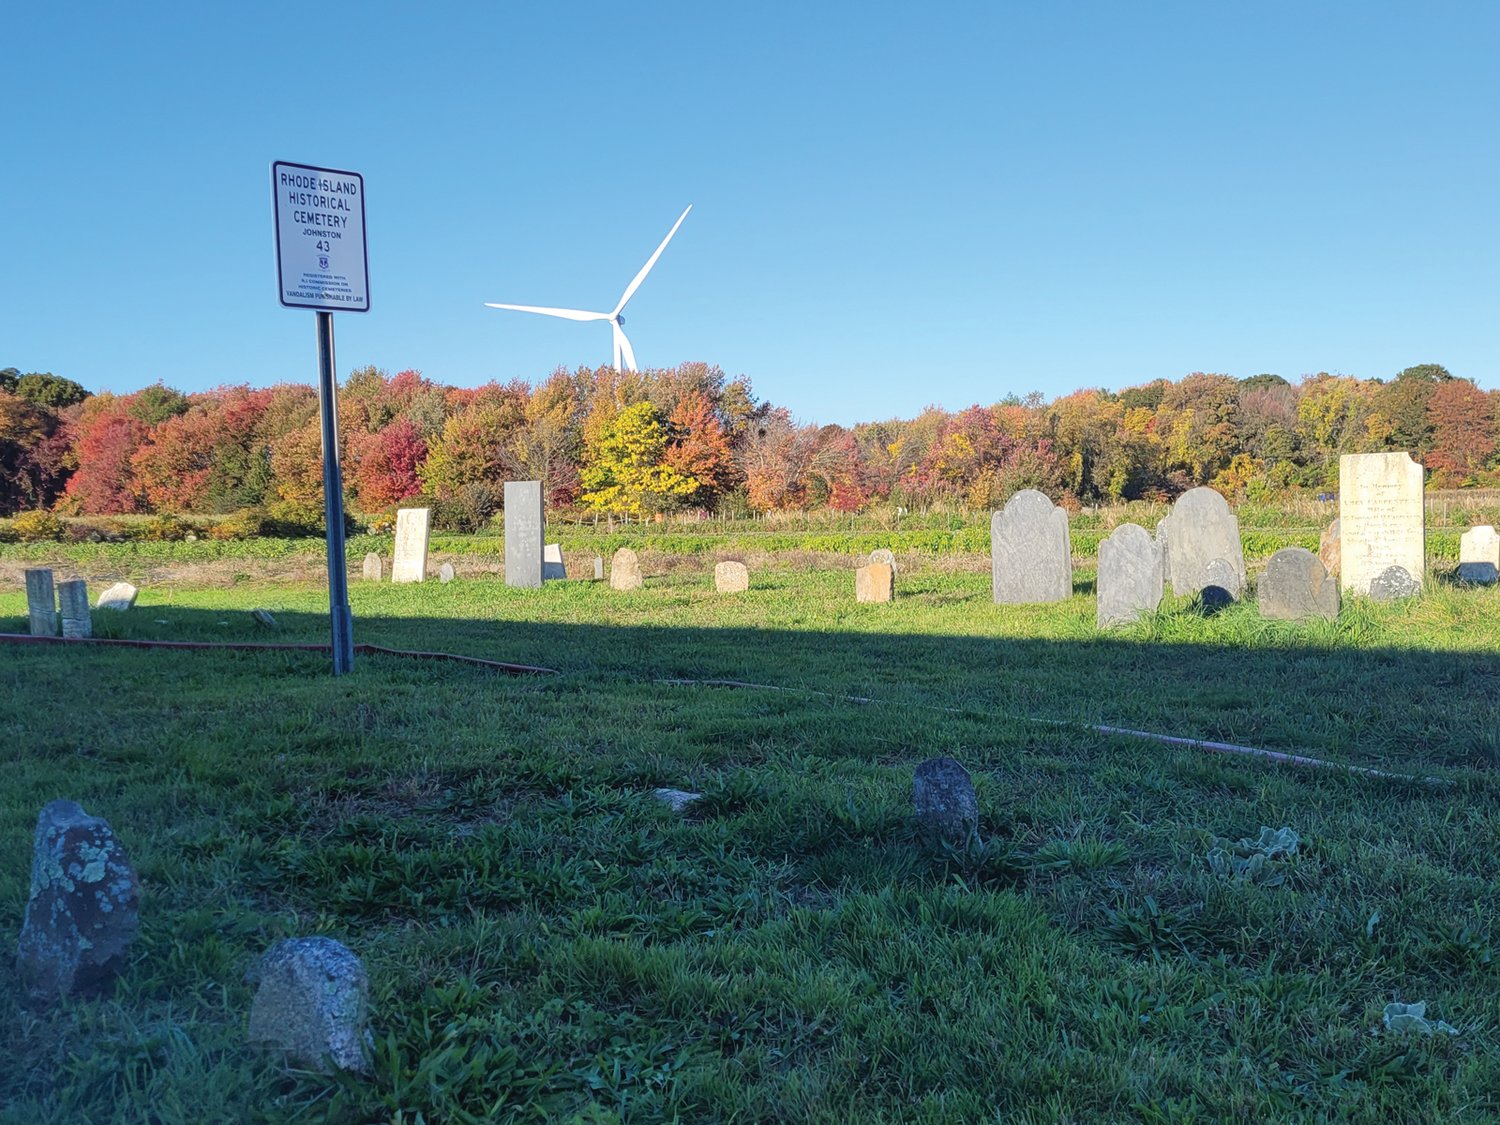 CEMETERY 43: In the middle of Salisbury Farm, a tiny graveyard survives — the former resting place of Col. Israel Angell, and final resting place of Arnold Fenner, who was struck by lightning.